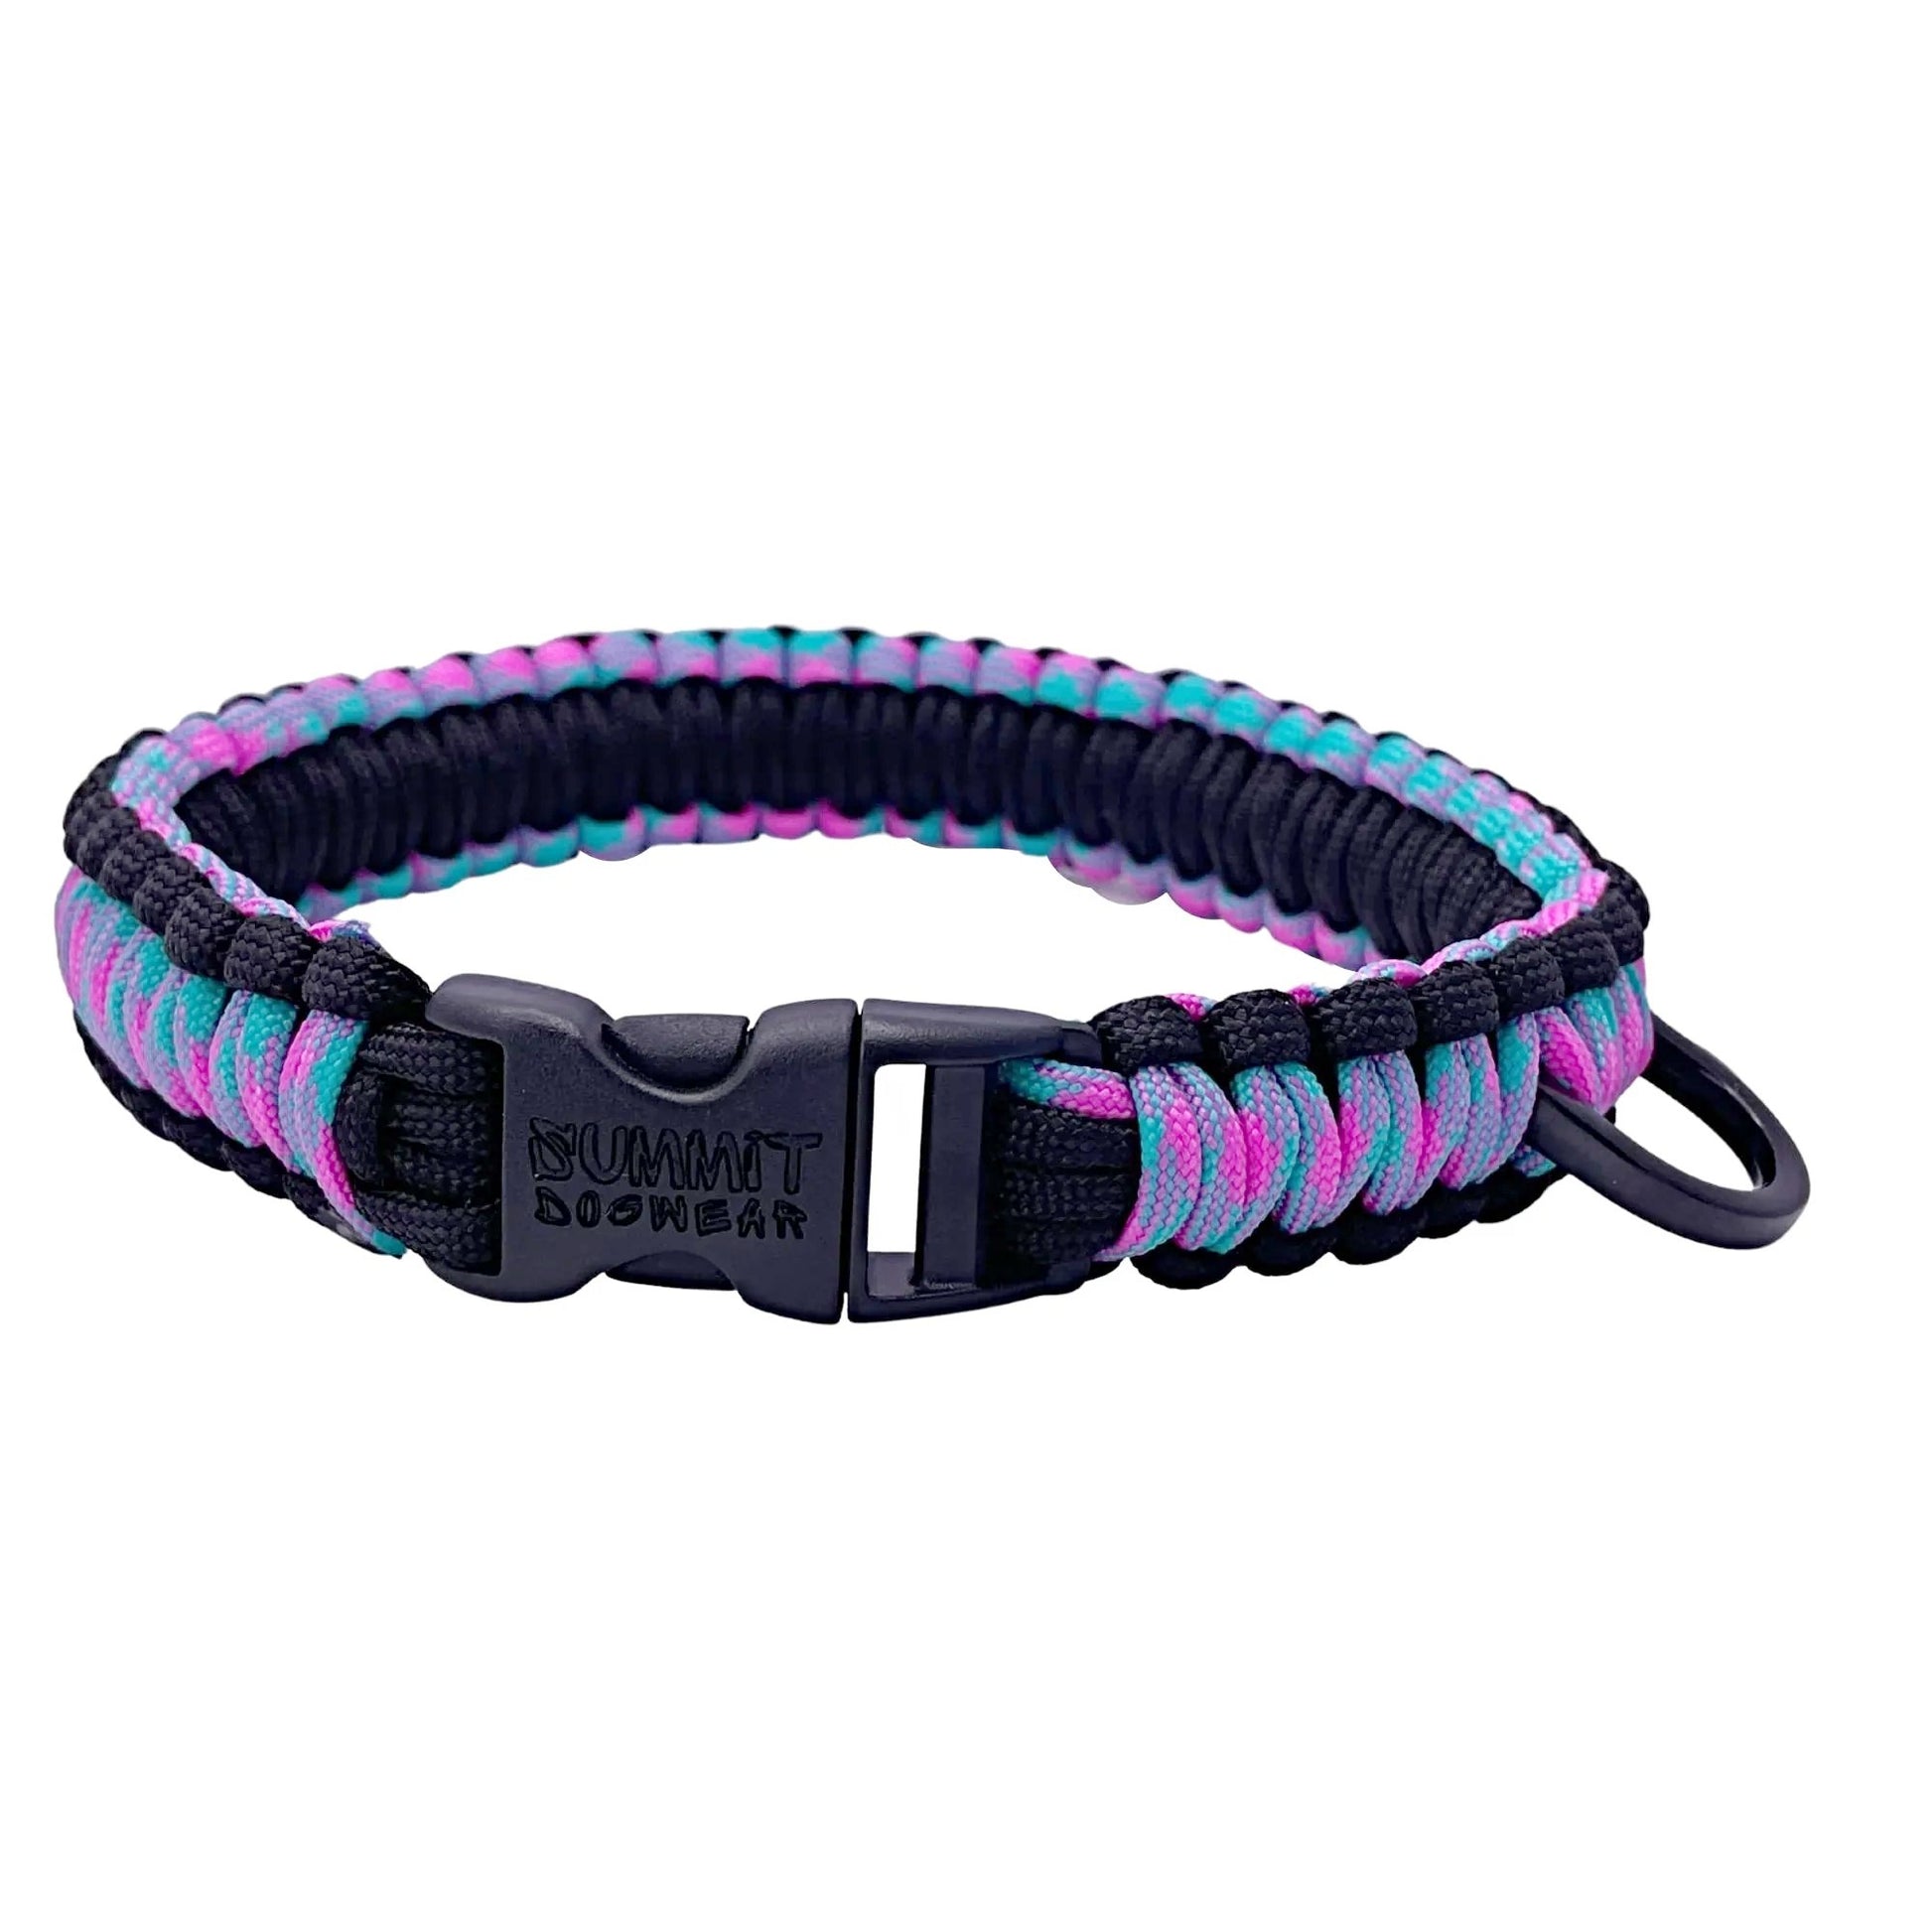 Stylish and Durable Paracord Collar for Small Dogs and Pups!